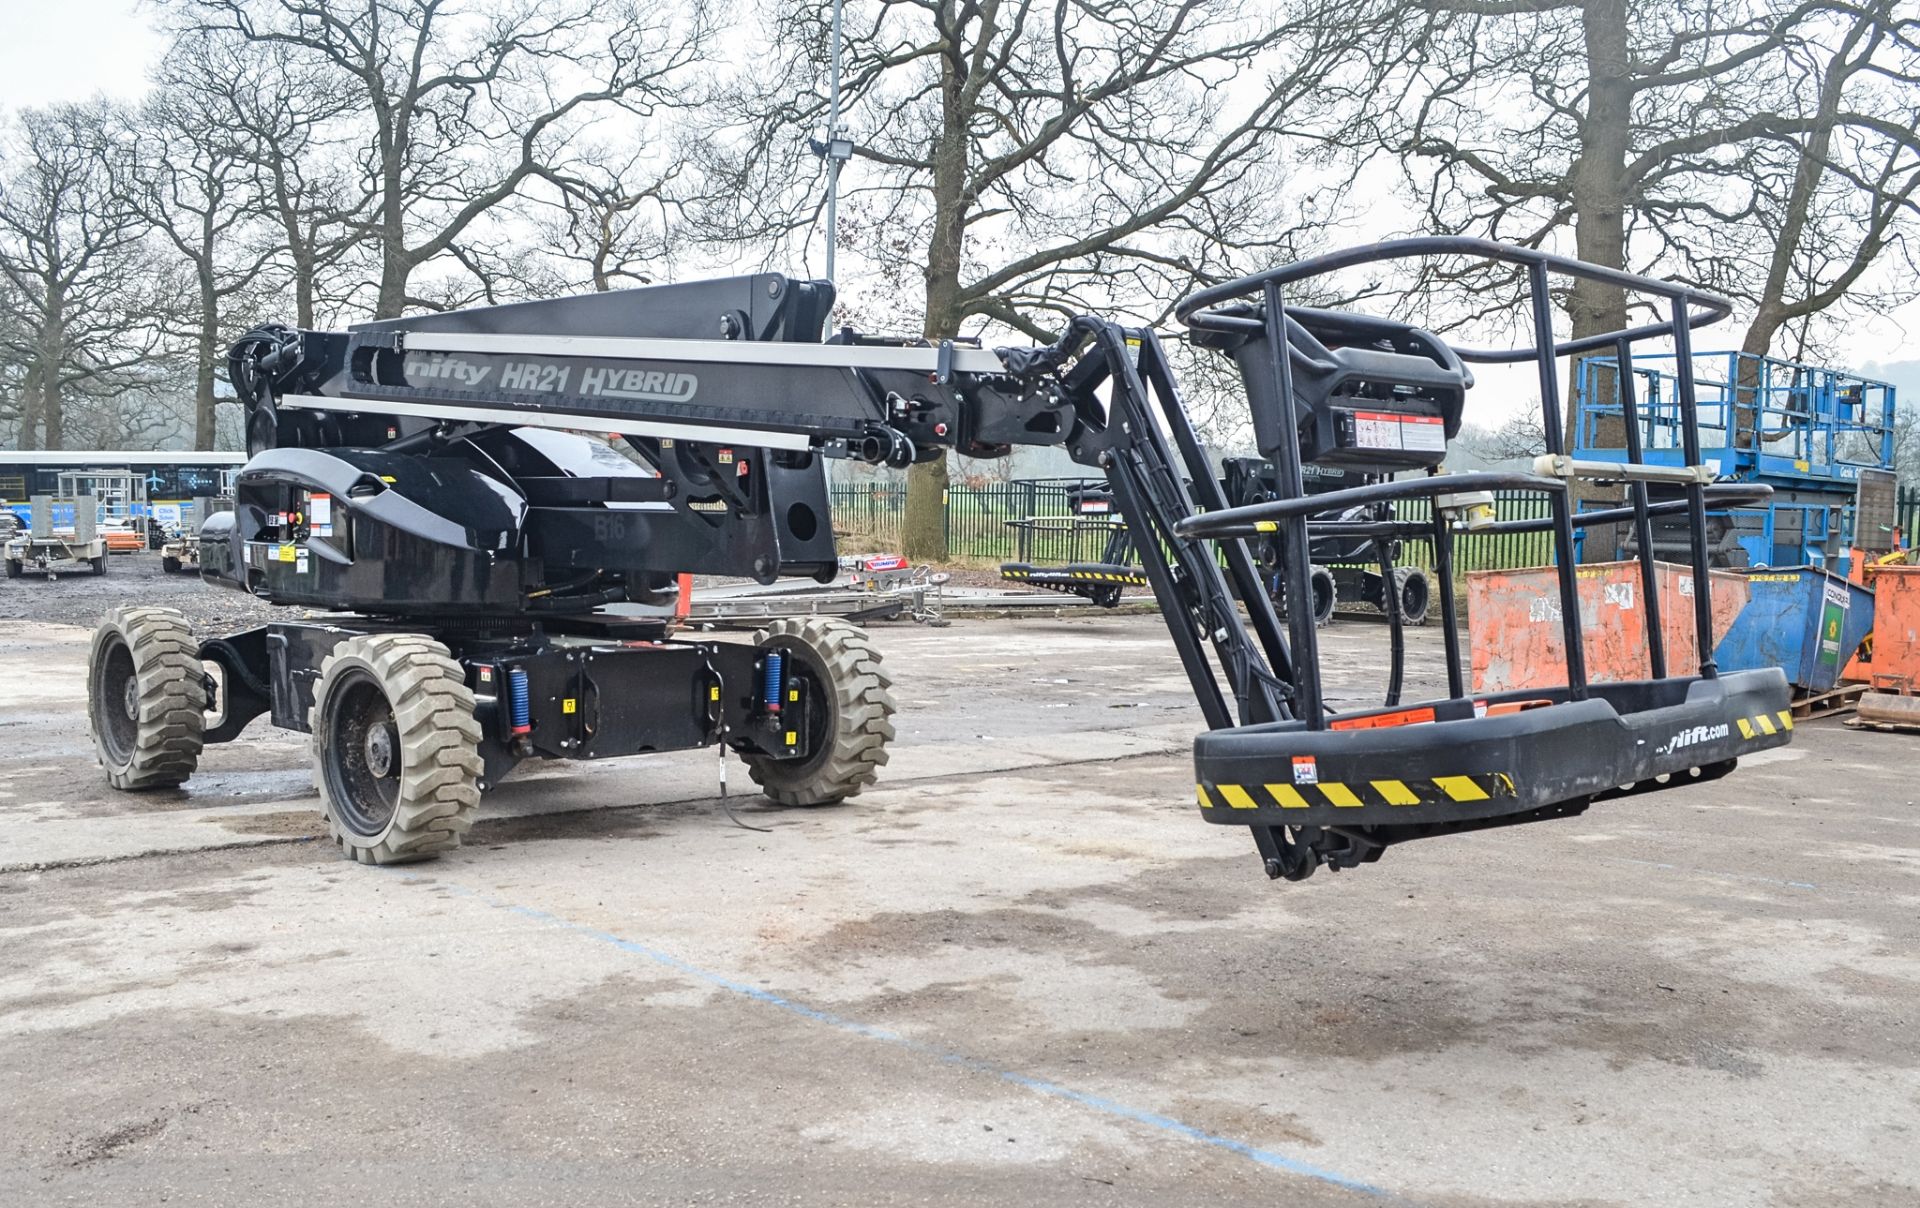 Nifty H21 Hybrid diesel/battery electric 4x4 rough terrain articulated boom lift access platform - Image 2 of 22